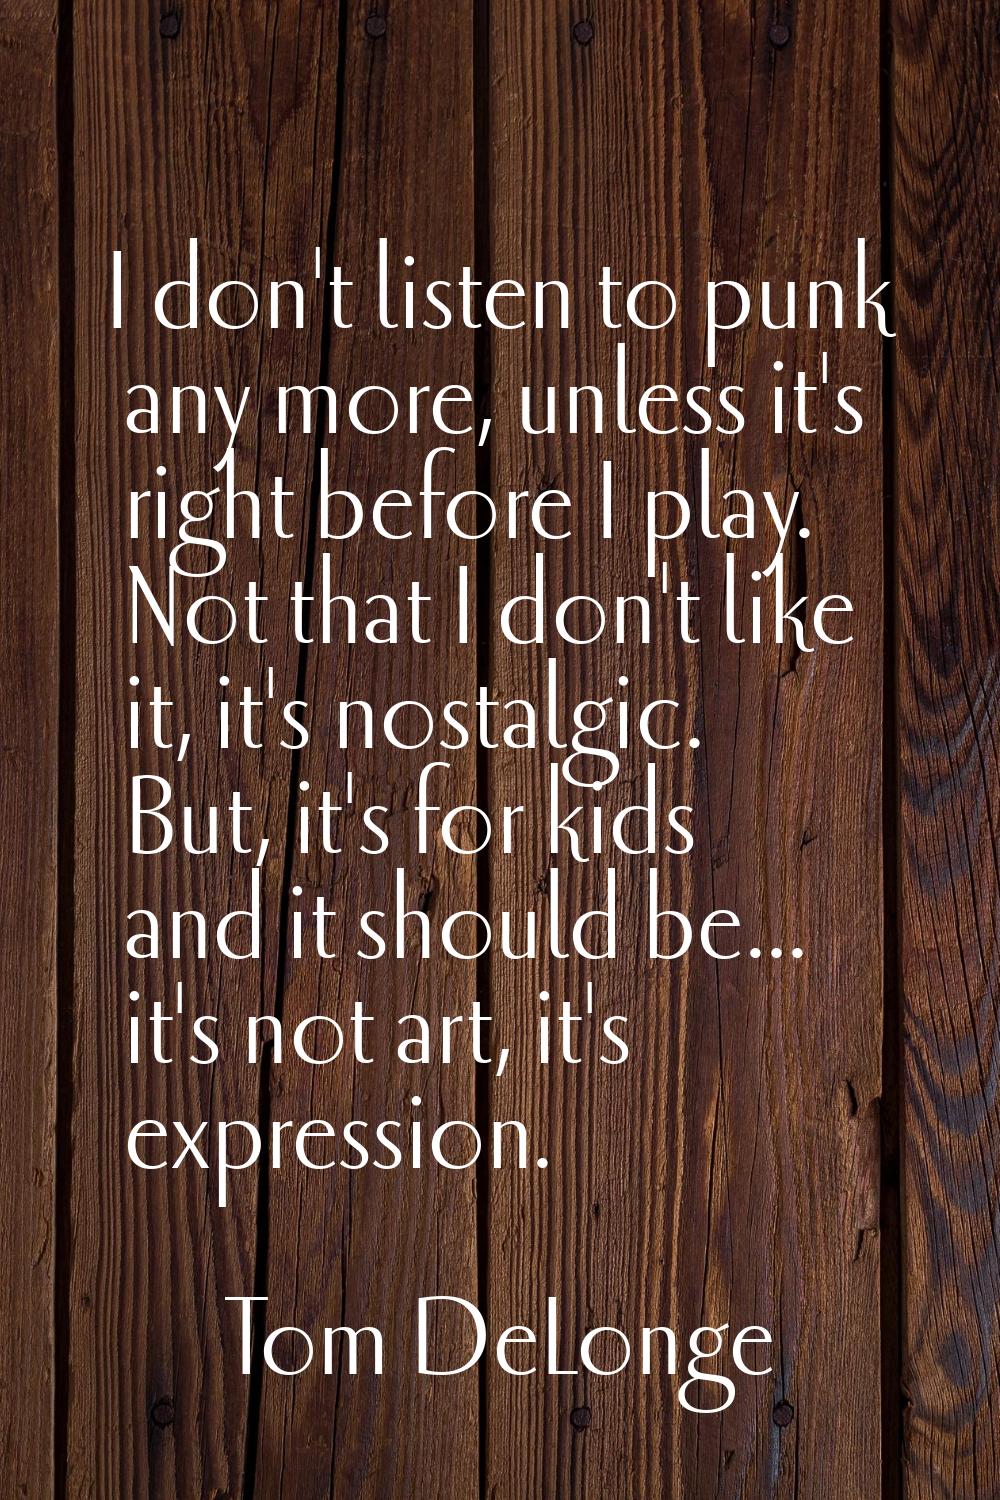 I don't listen to punk any more, unless it's right before I play. Not that I don't like it, it's no